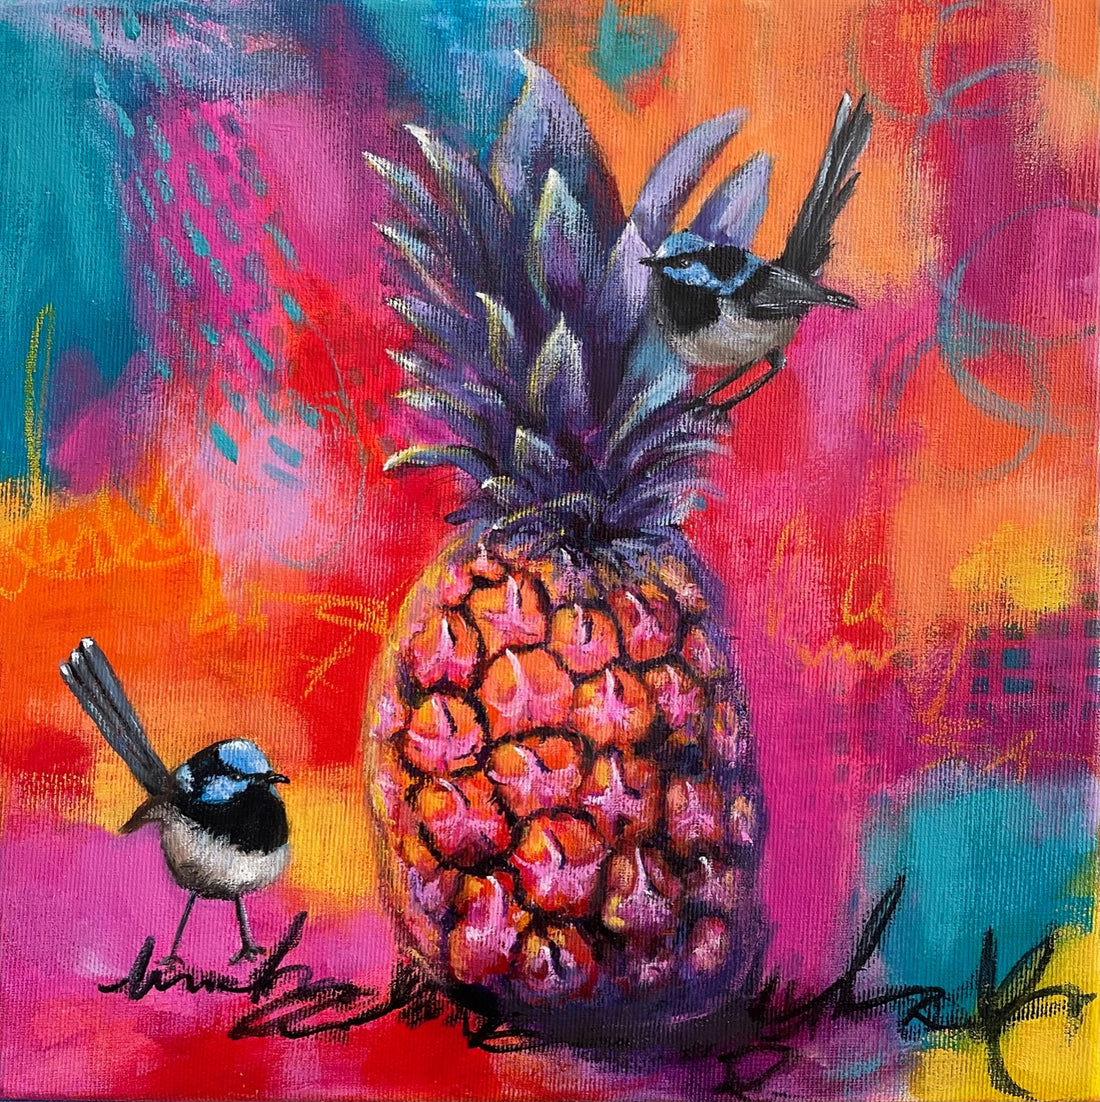 Colourful Mixed Media painting of blue wrens with pineapple